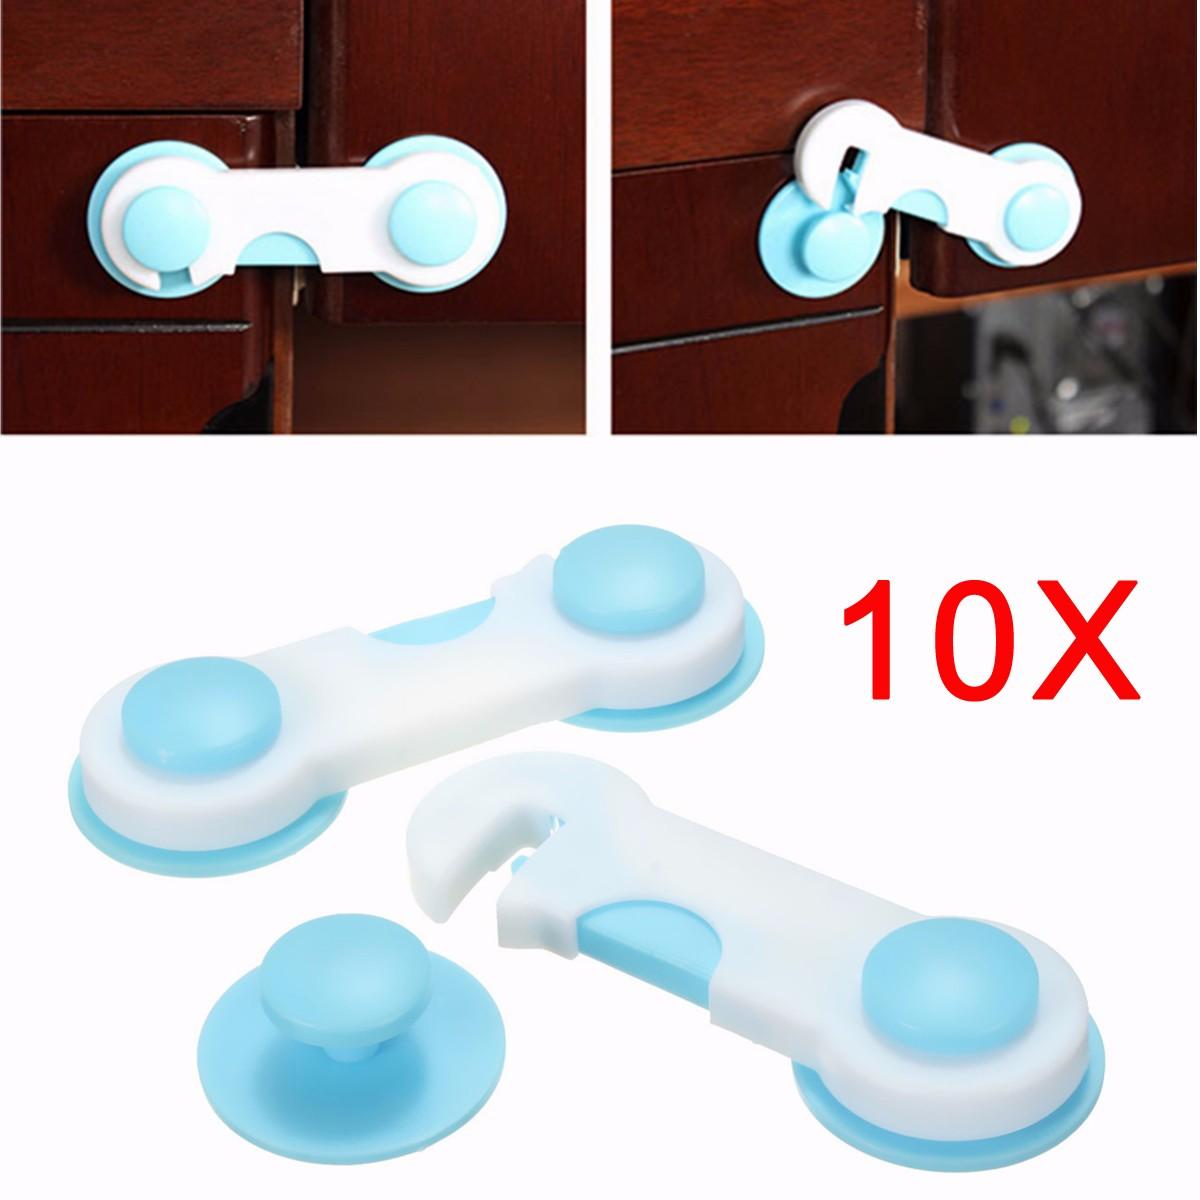 

10Pcs Safe Lock Blue&White Plastic for Cupboard Door Drawers Security with Glue